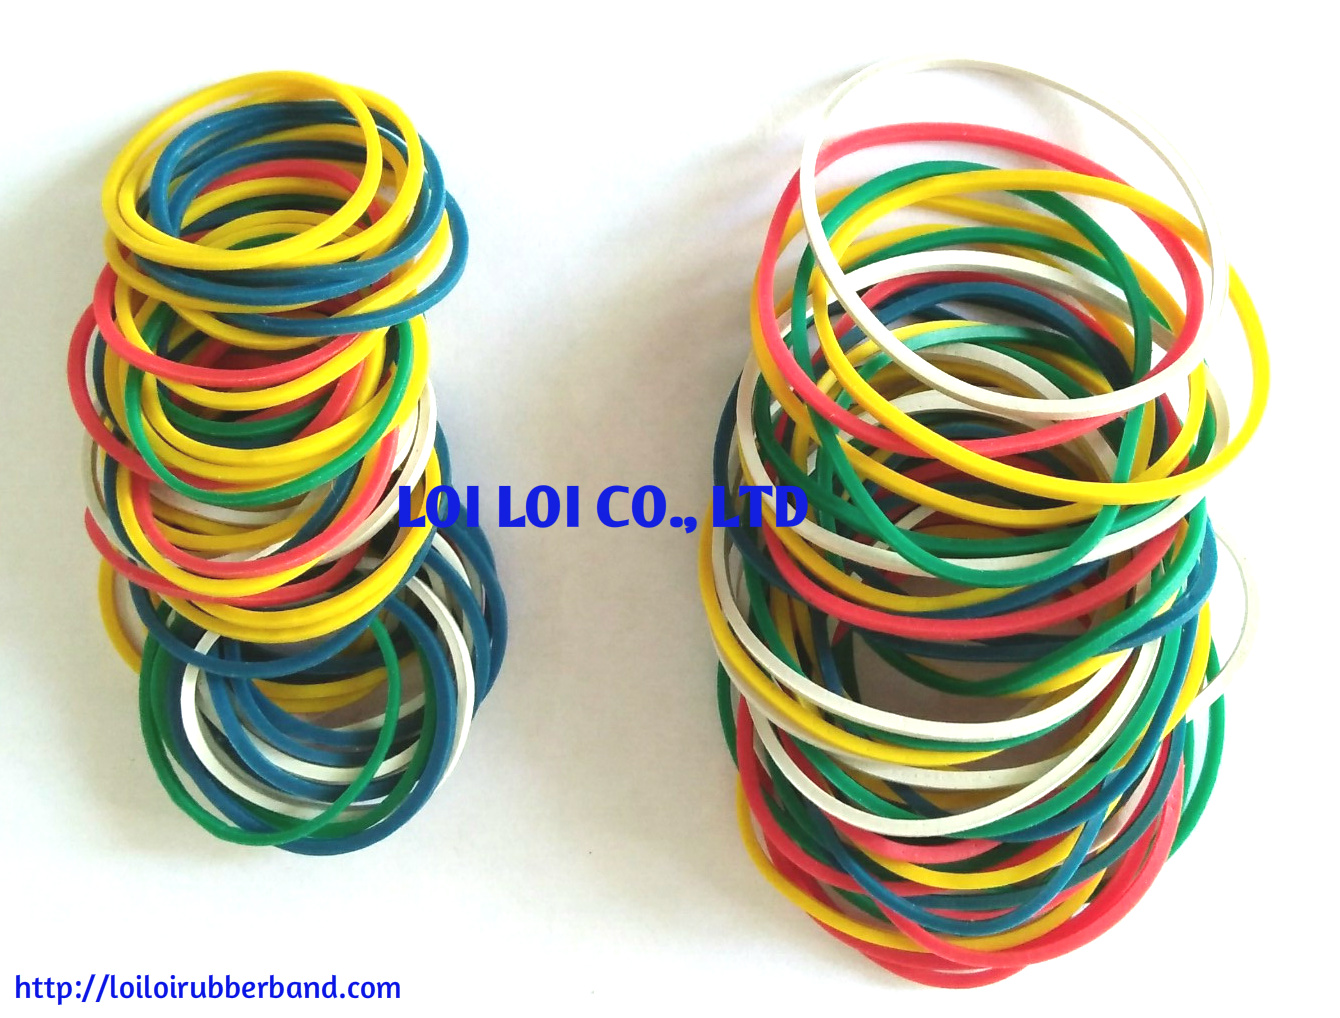 New year look book Rubber band free samples offer to any customers who has demand with this kind of natural latex band rubber